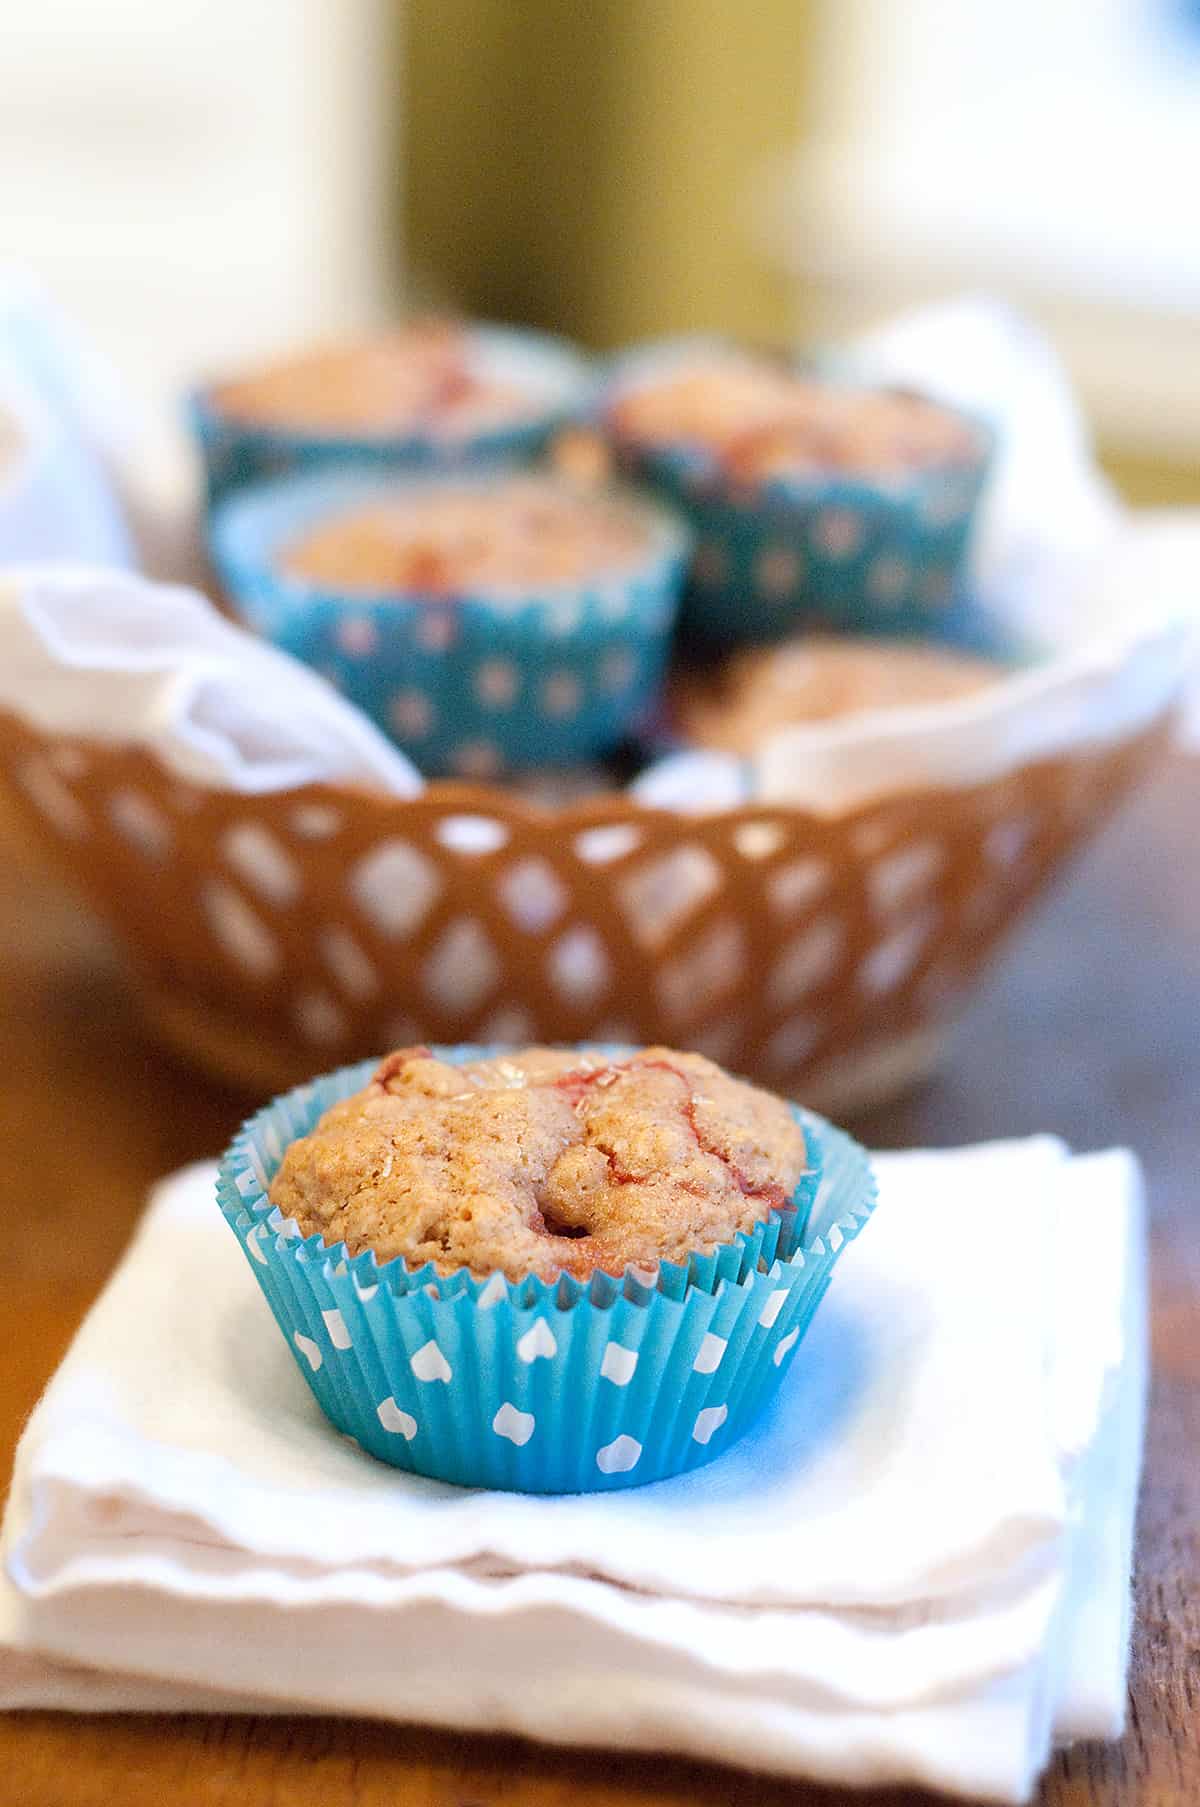 A strawberry lemon muffin sitting on a napkin with a basket of muffins in the background.